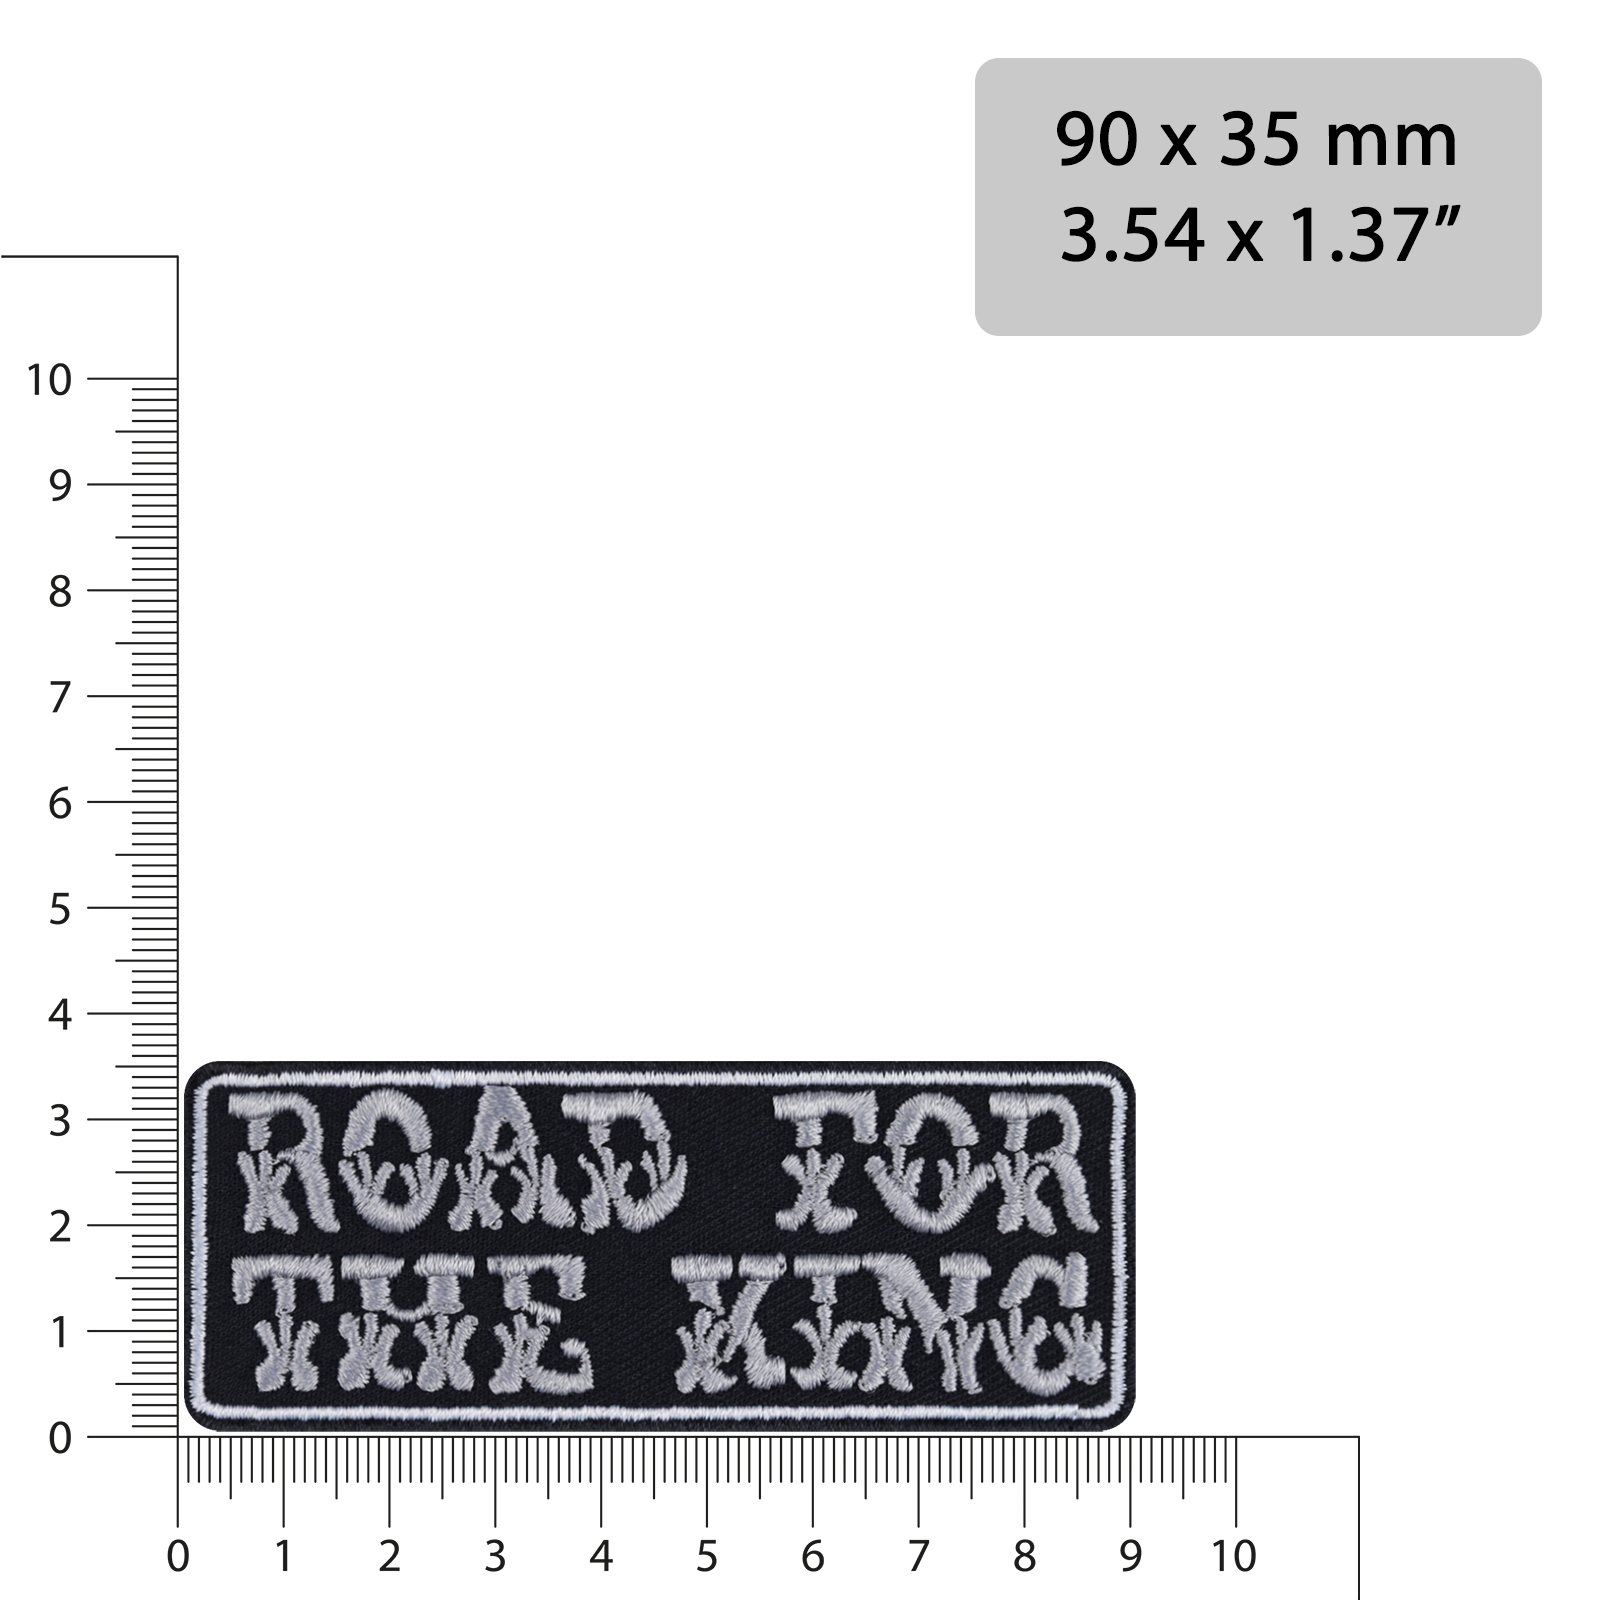 Road for the king - Patch